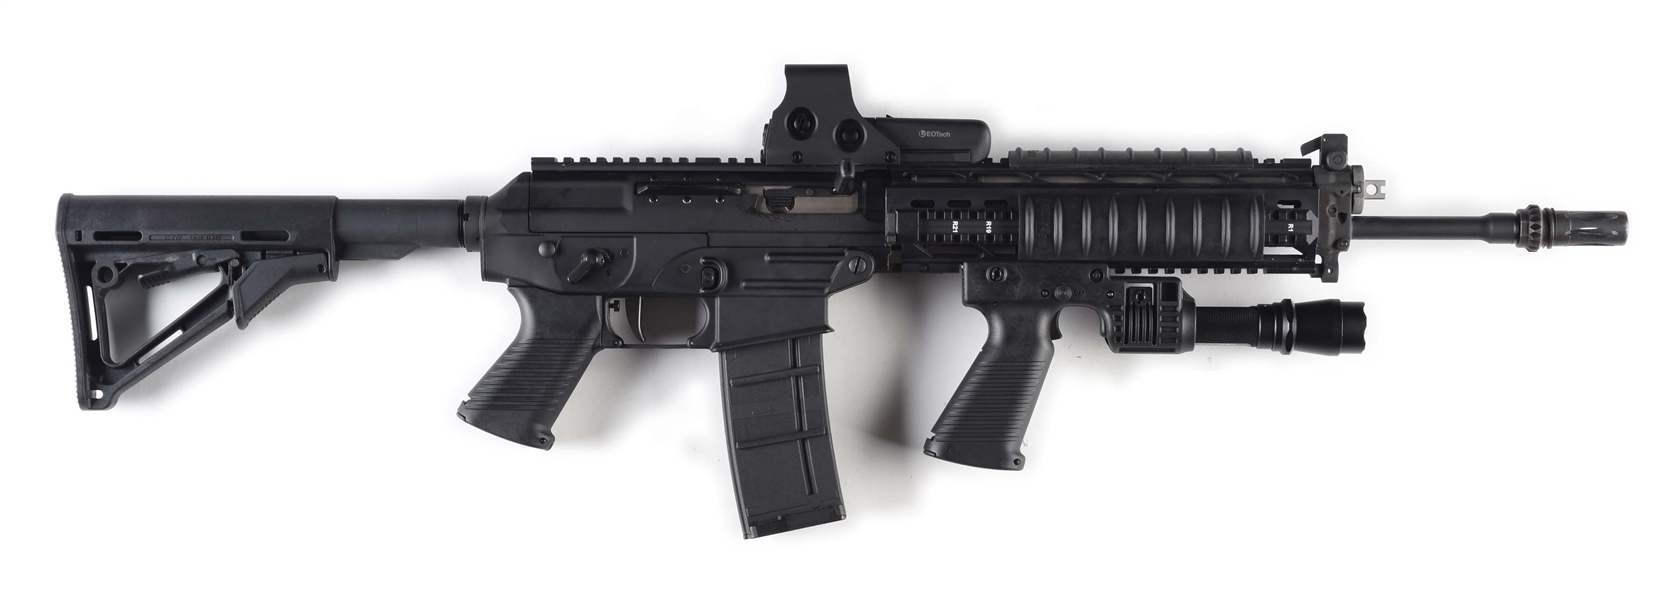 (M) SIG SAUER 556 SEMI-AUTOMATIC RIFLE WITH ACCESSORIES.